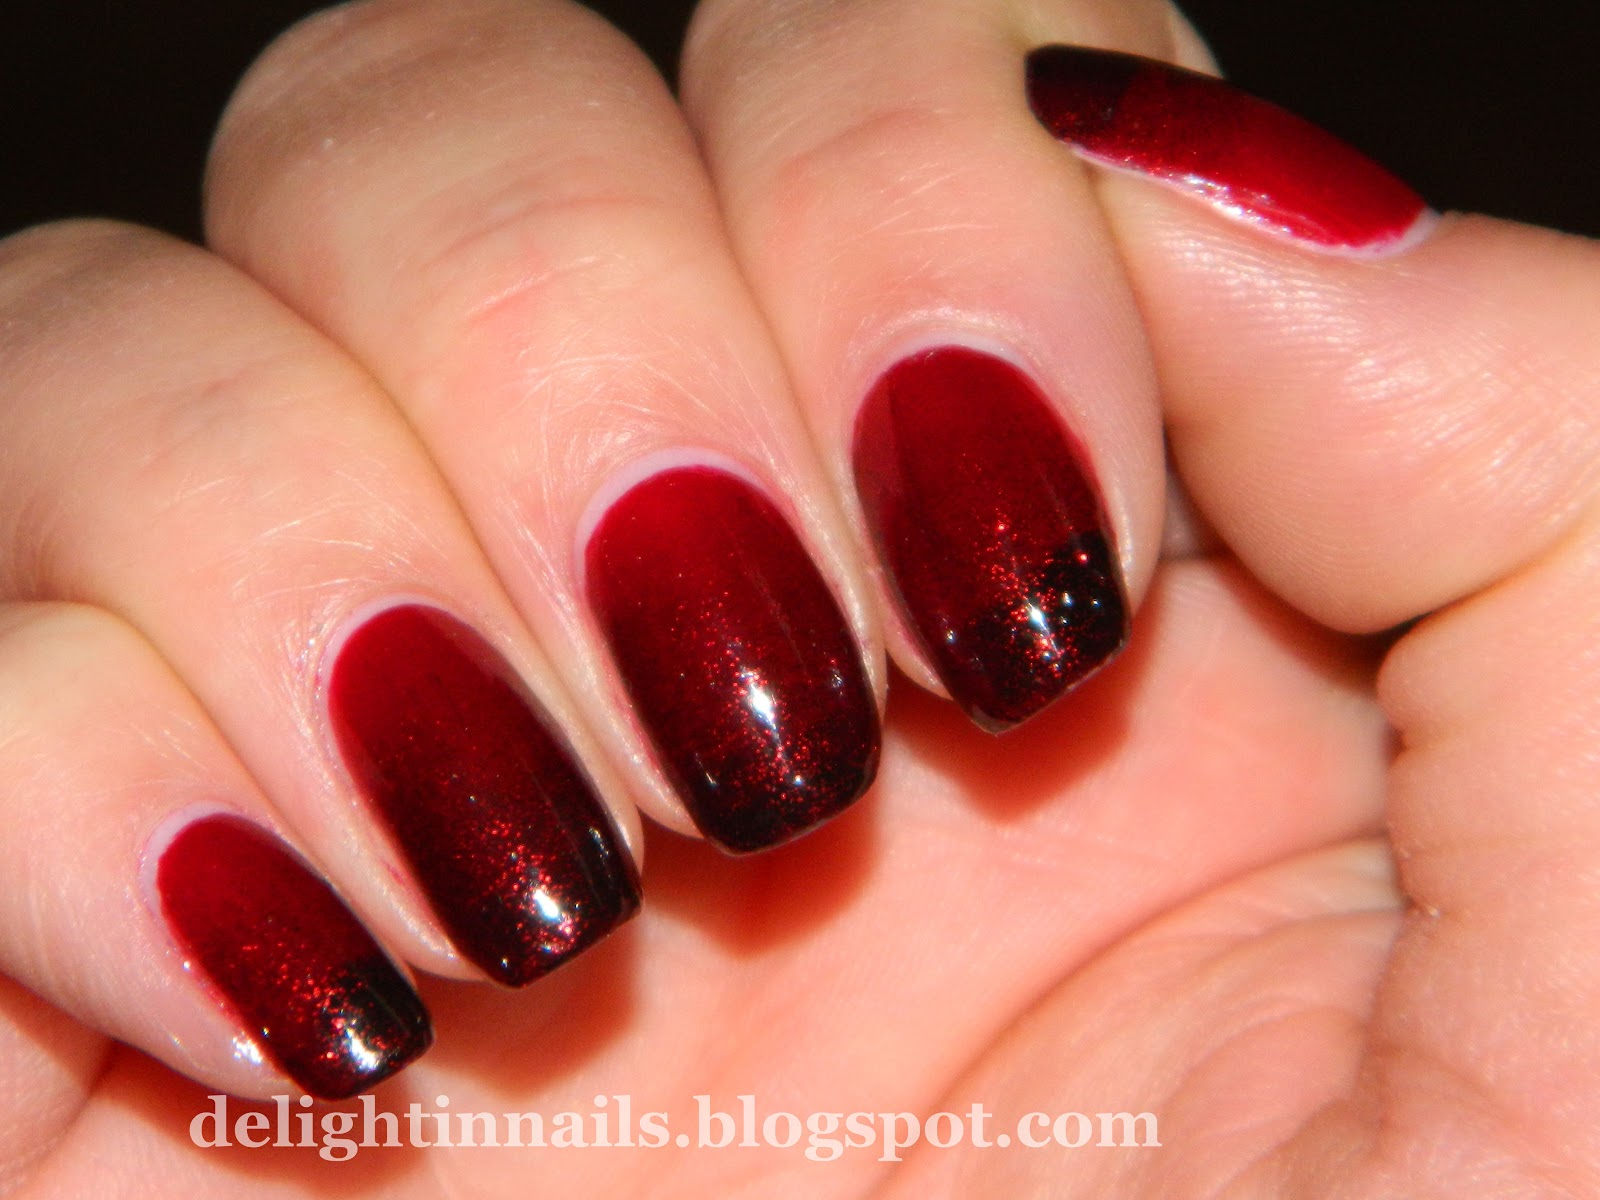 Delight In Nails: Nail-Aween Nail Art Challenge - Any Halloween ...